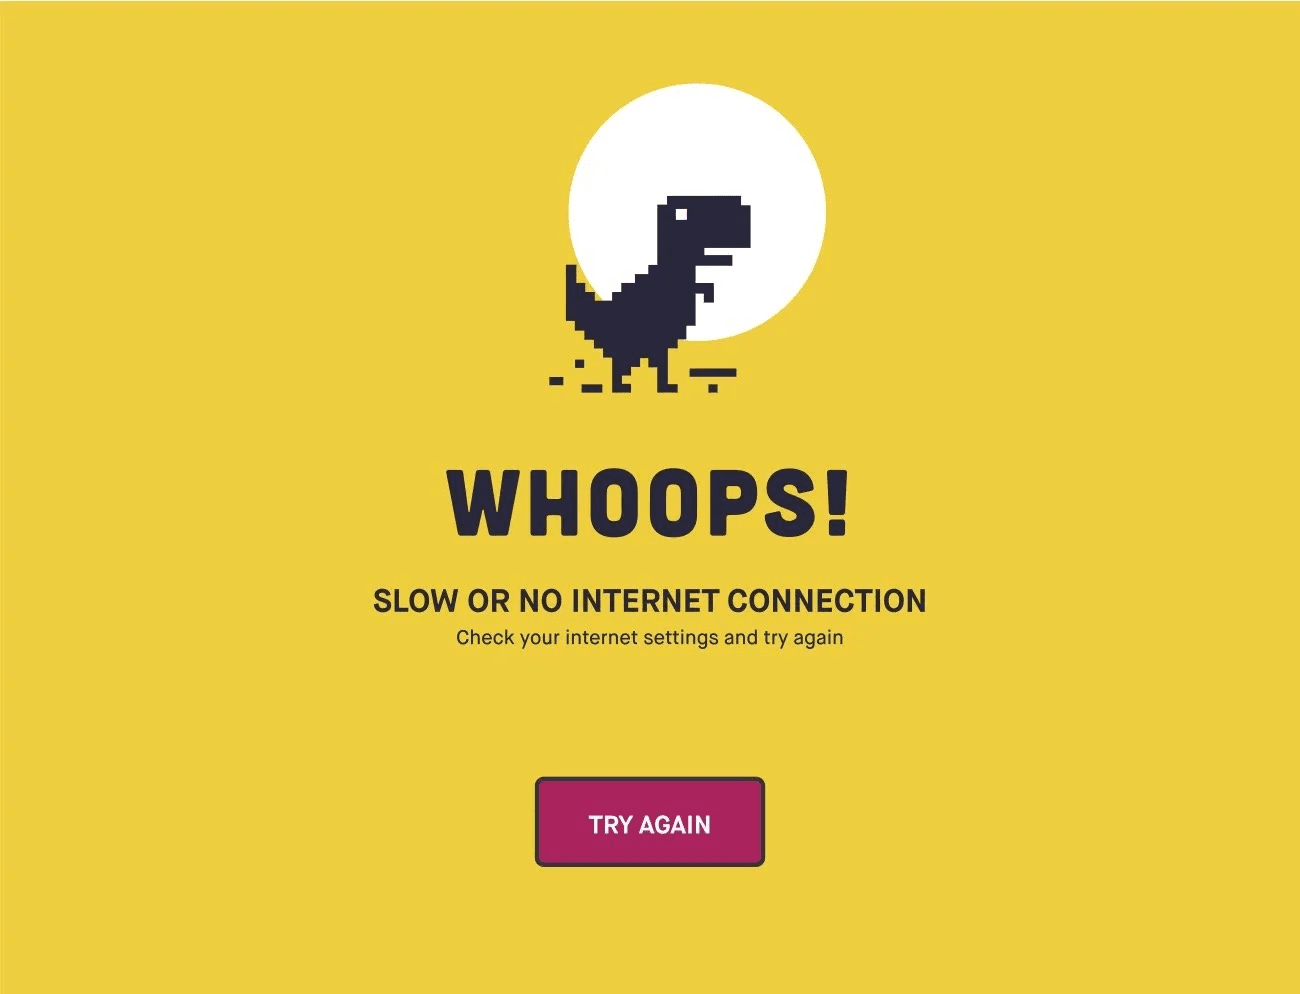 Whoops! slow or no internet connection.